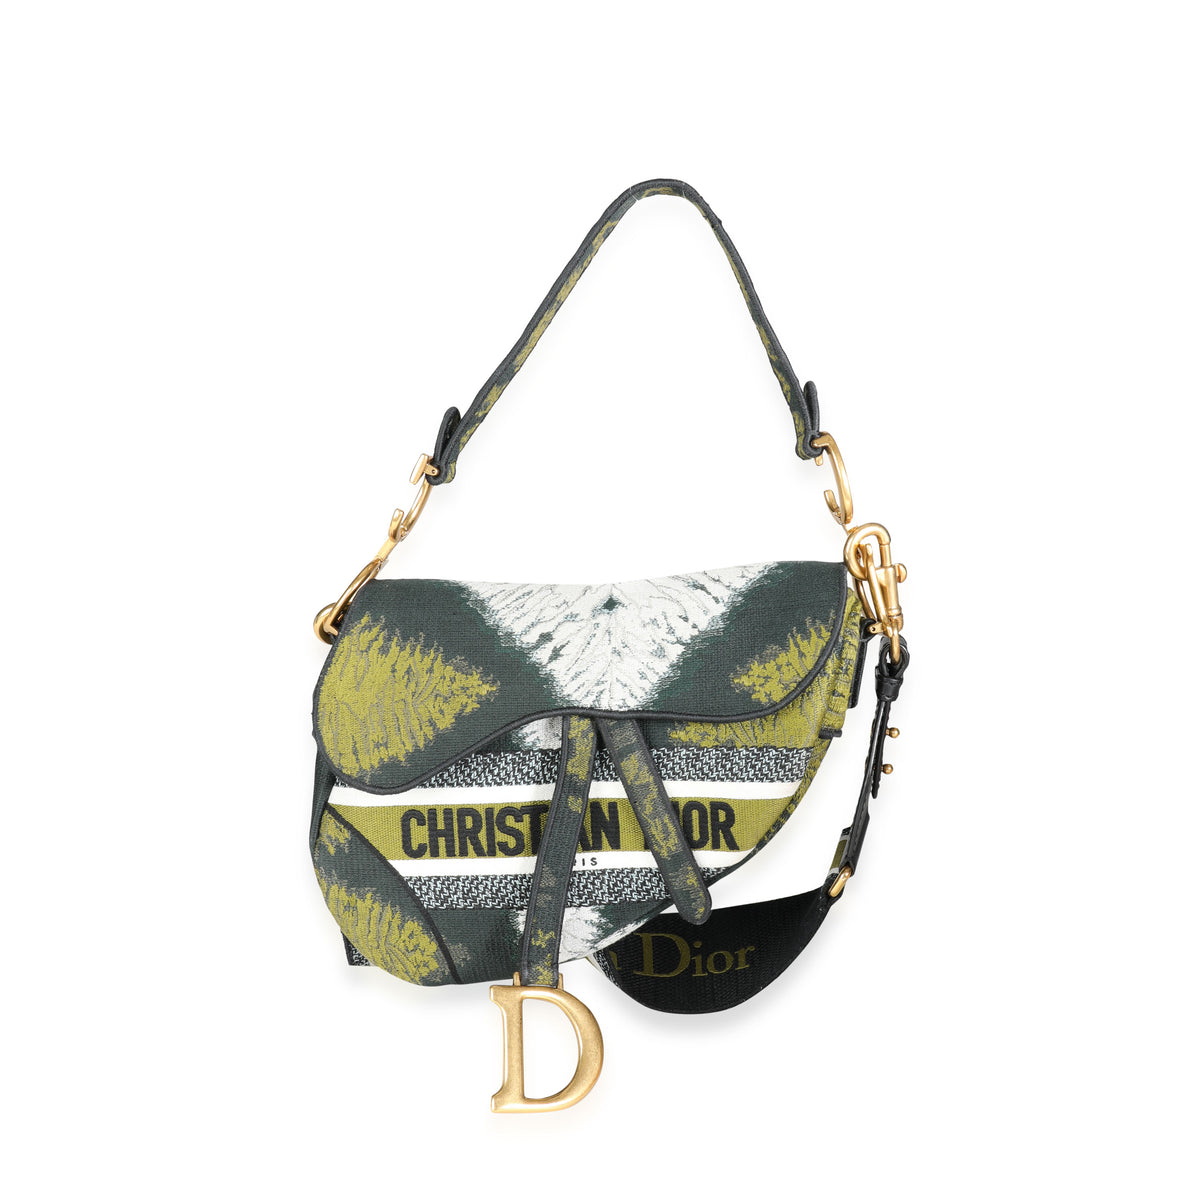 Dior Green Tie Dye Embroidered Saddle Bag with Bandoulière Strap